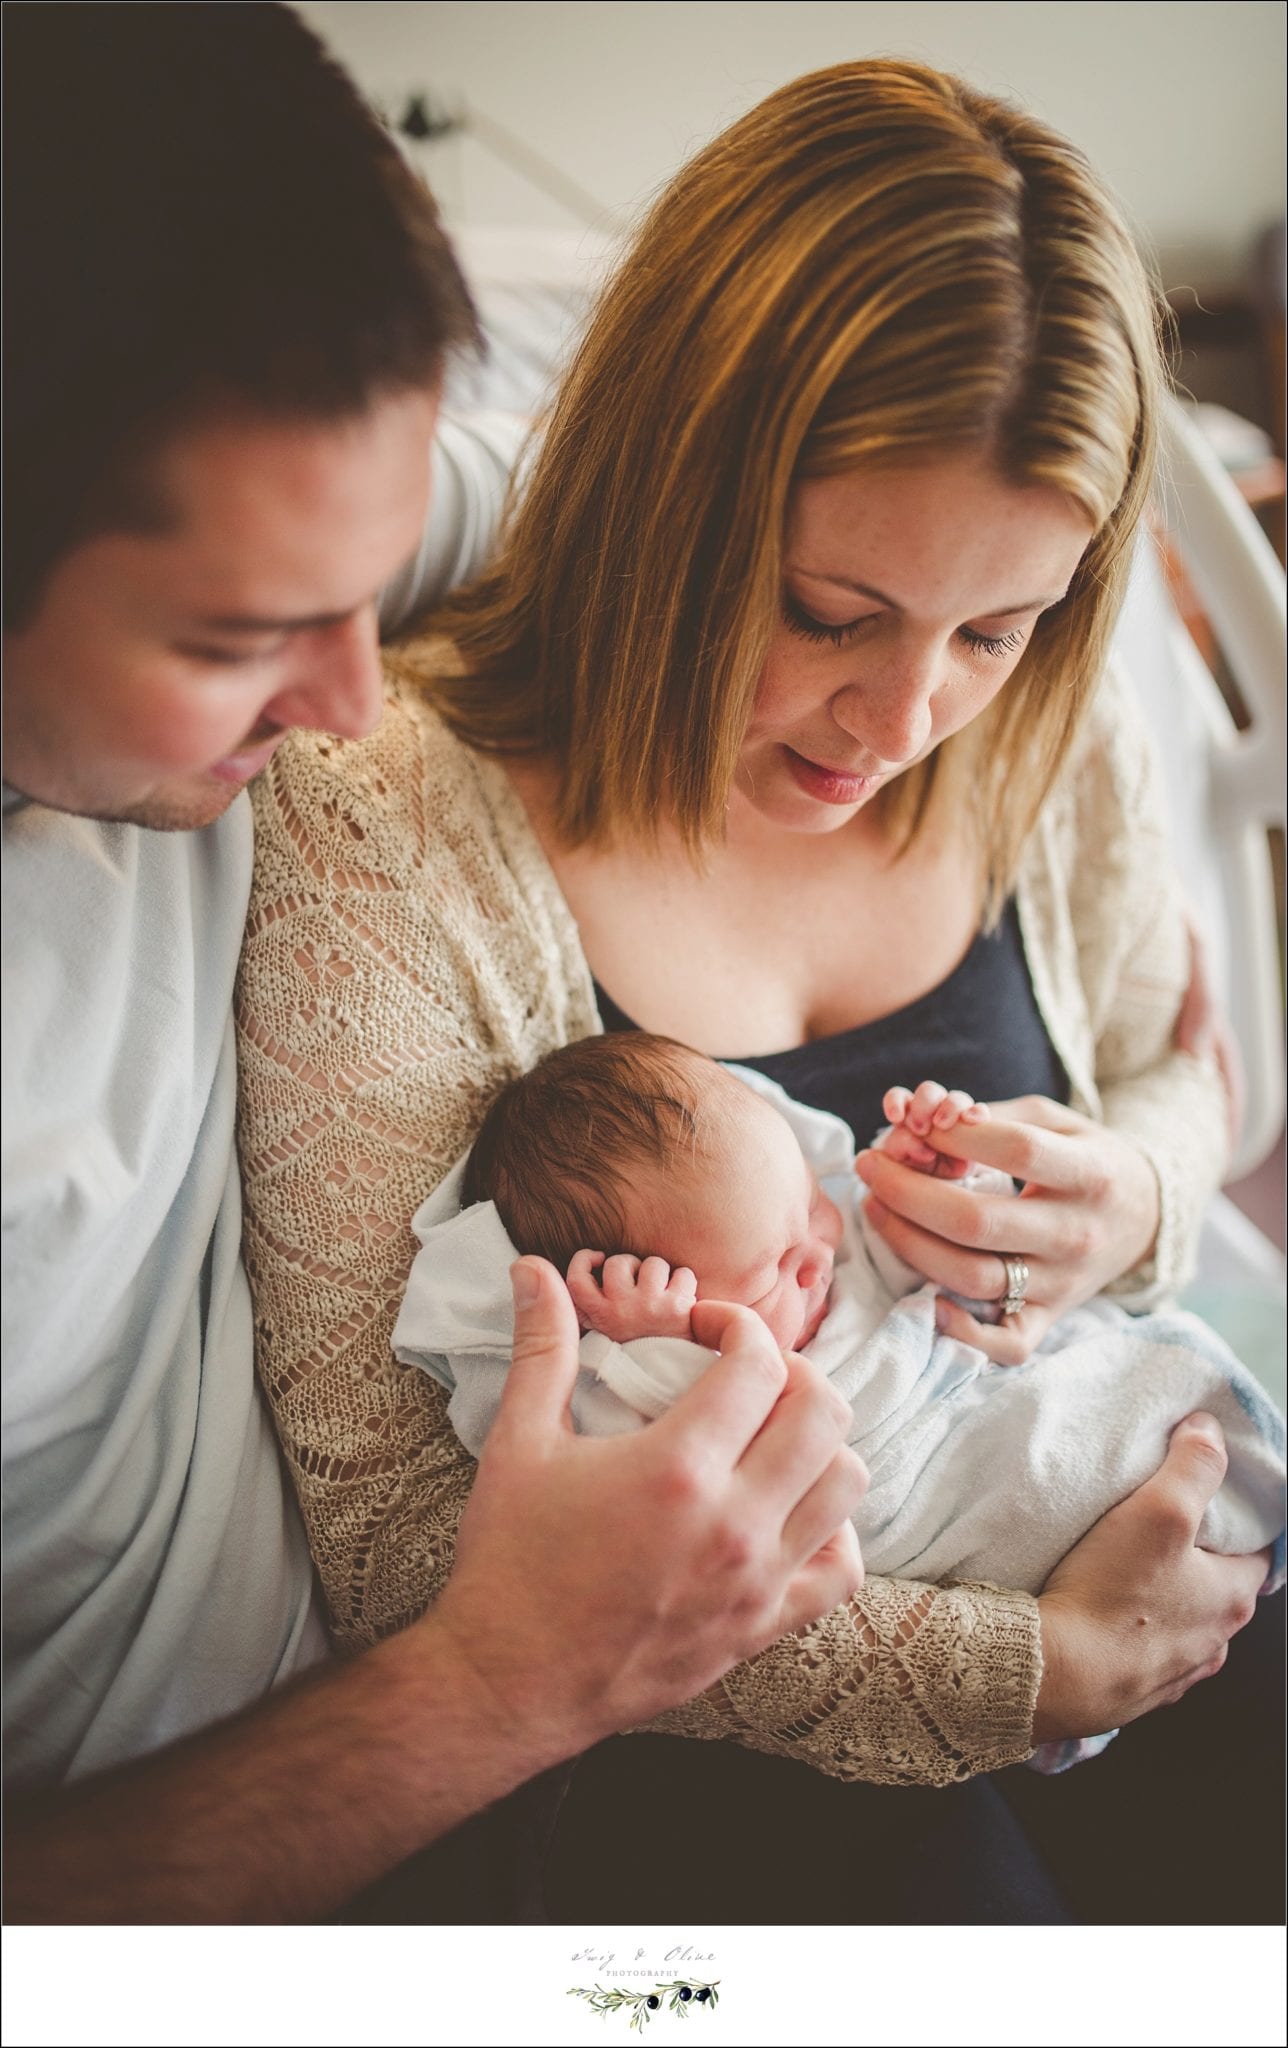 moms and dads, newborns, hospital, 48 hours after birth, born yesterday, happy babies, perfect, precious, miracles, proud parents, Twig and Olive capture the moment, little hands, exciting moments, TOP, newborn photography in birthing suite, Sun Prairie area newborn photography